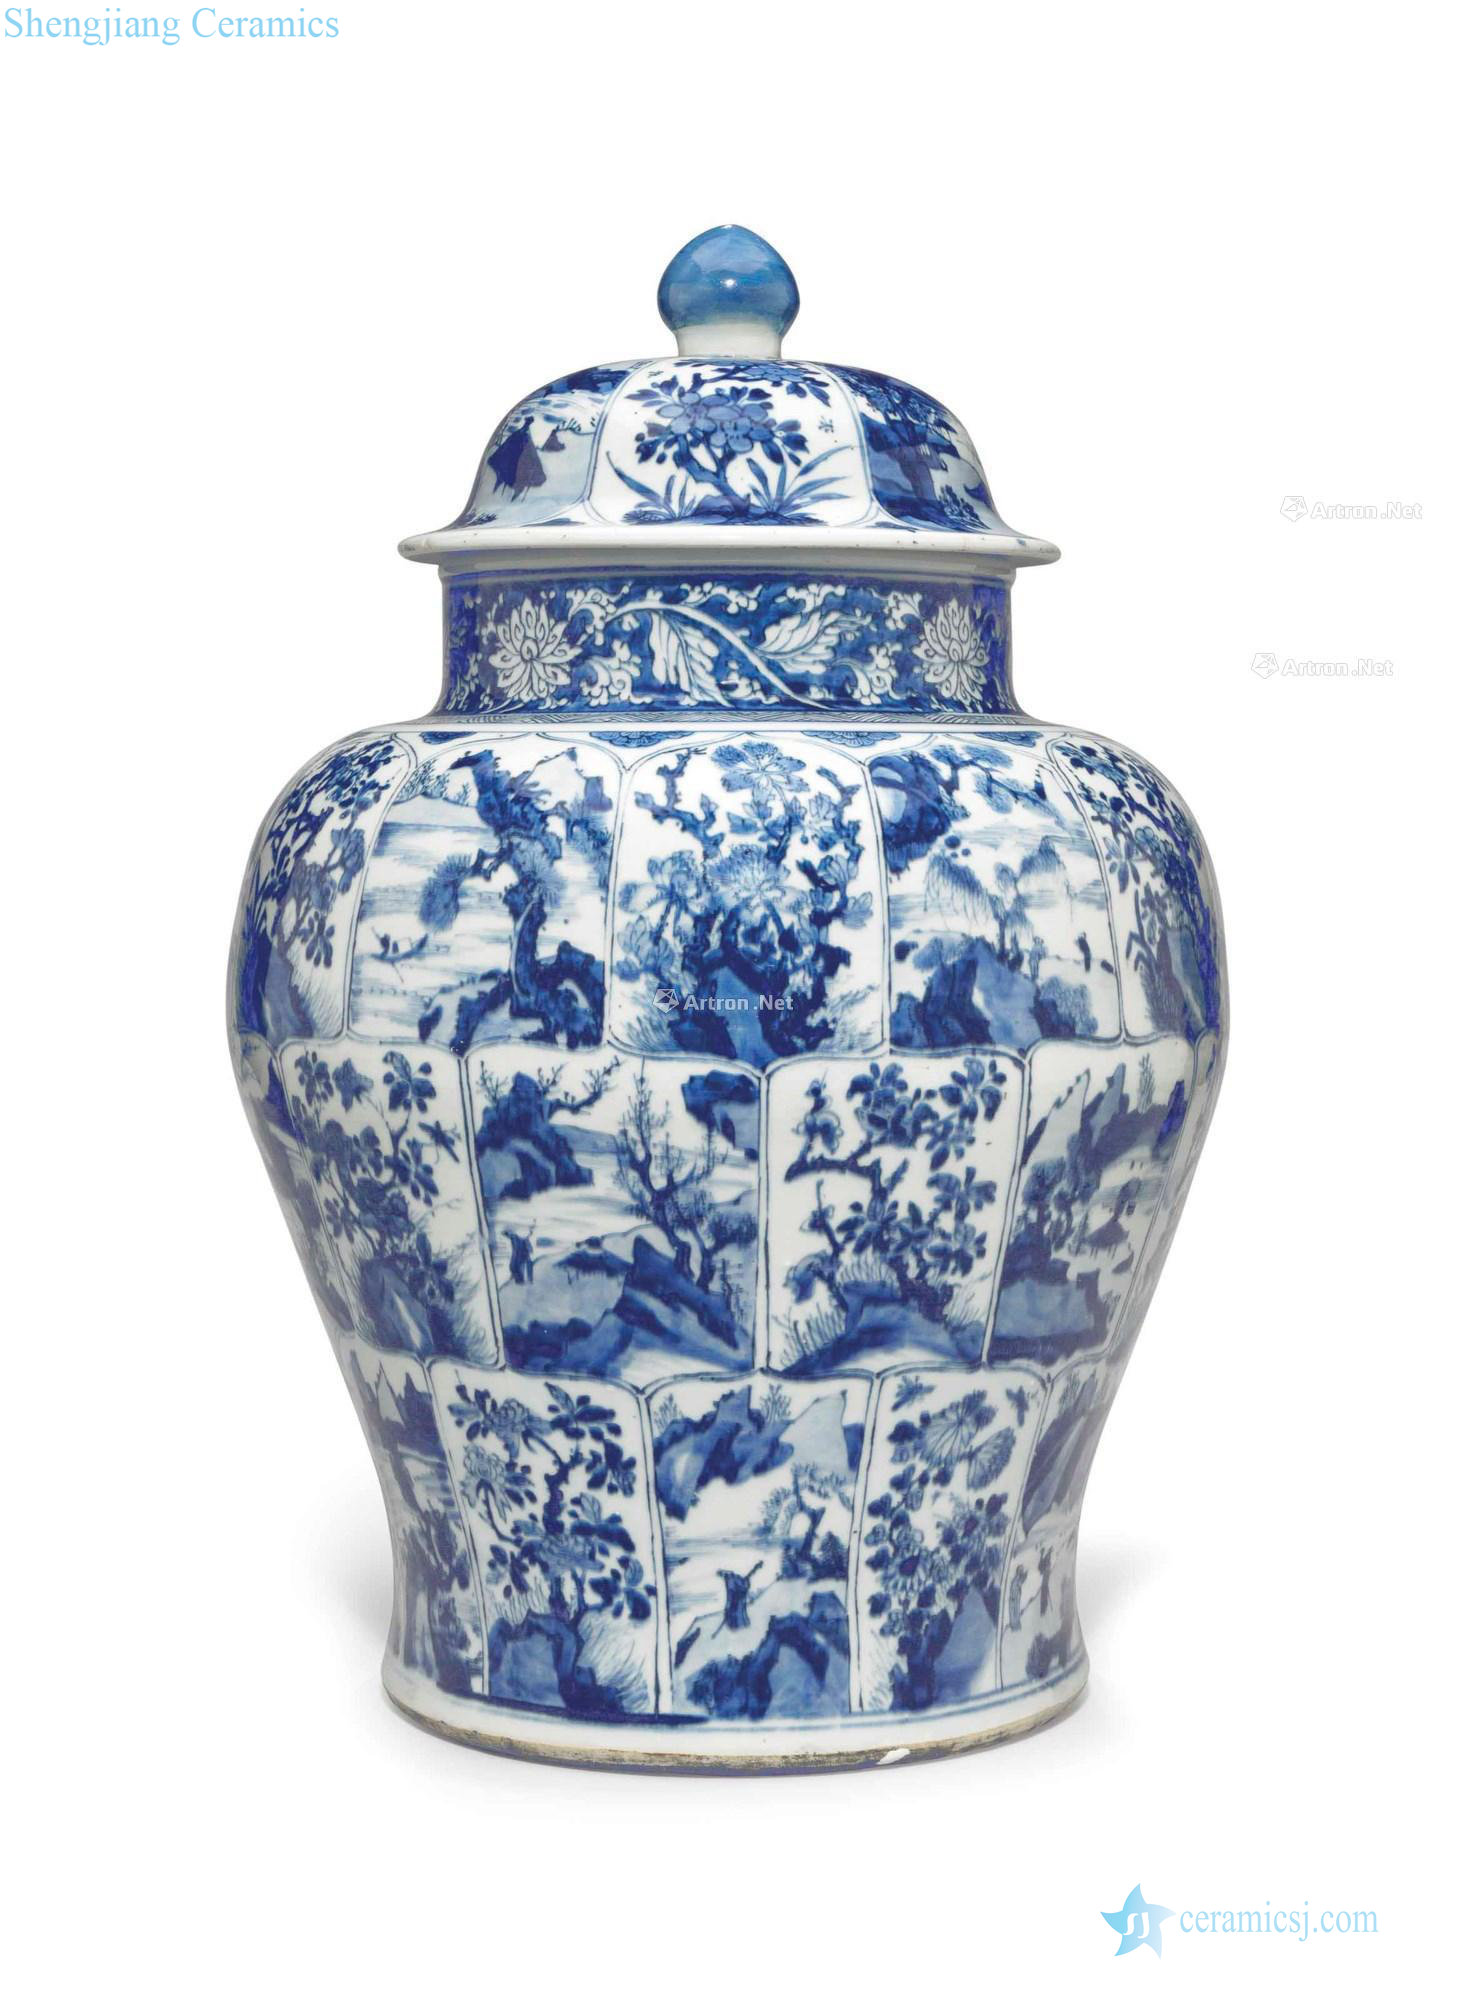 Kangxi period, 1662-1722 - A VERY LARGE BLUE AND WHITE JAR AND COVER